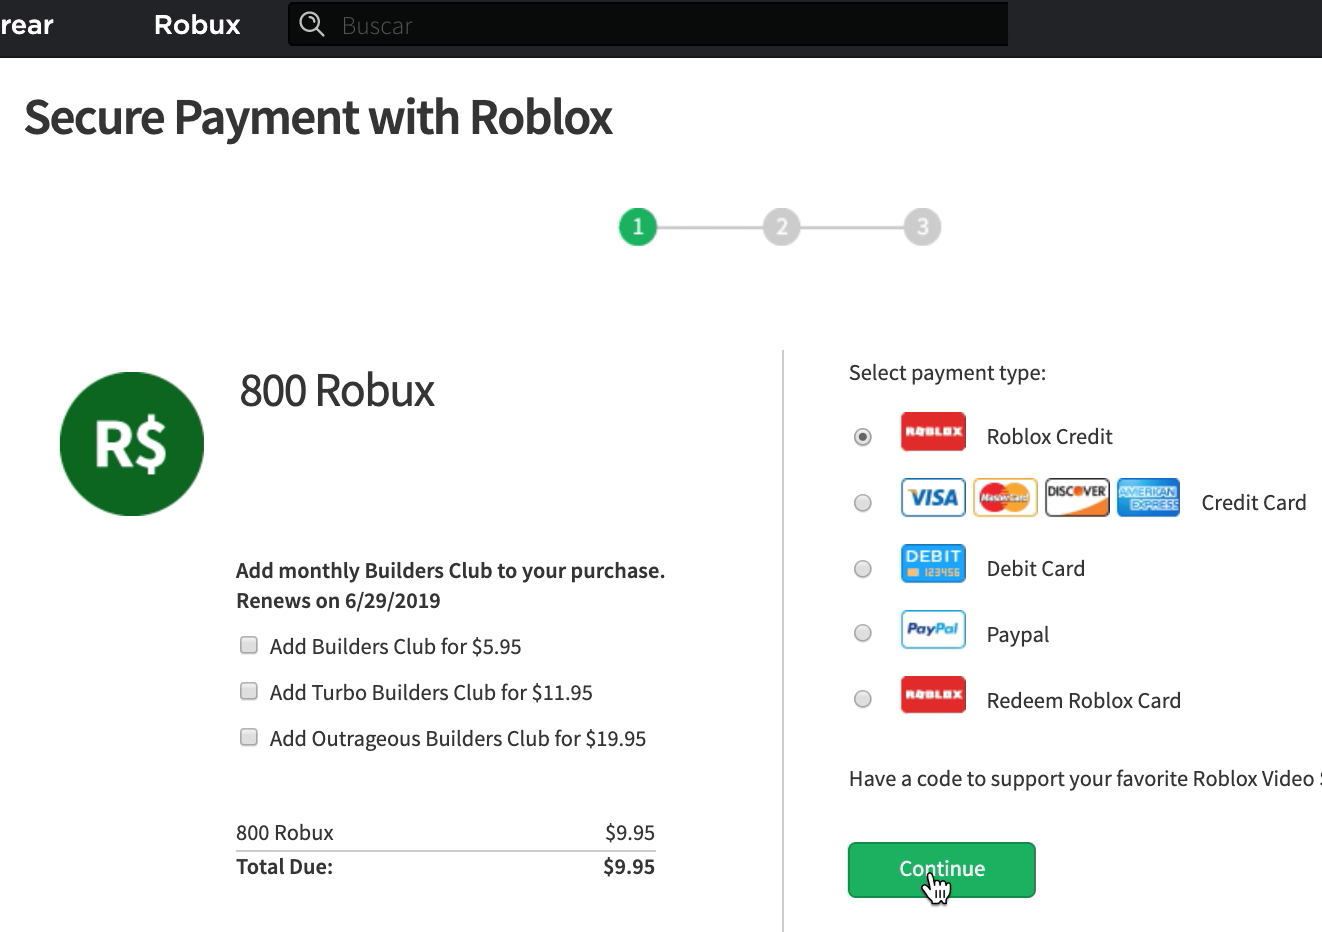 Pin Roblox Card How To Get Free Robux Codes 2019 February - roblox how to get free robux on roblox bc 2016 700k robux